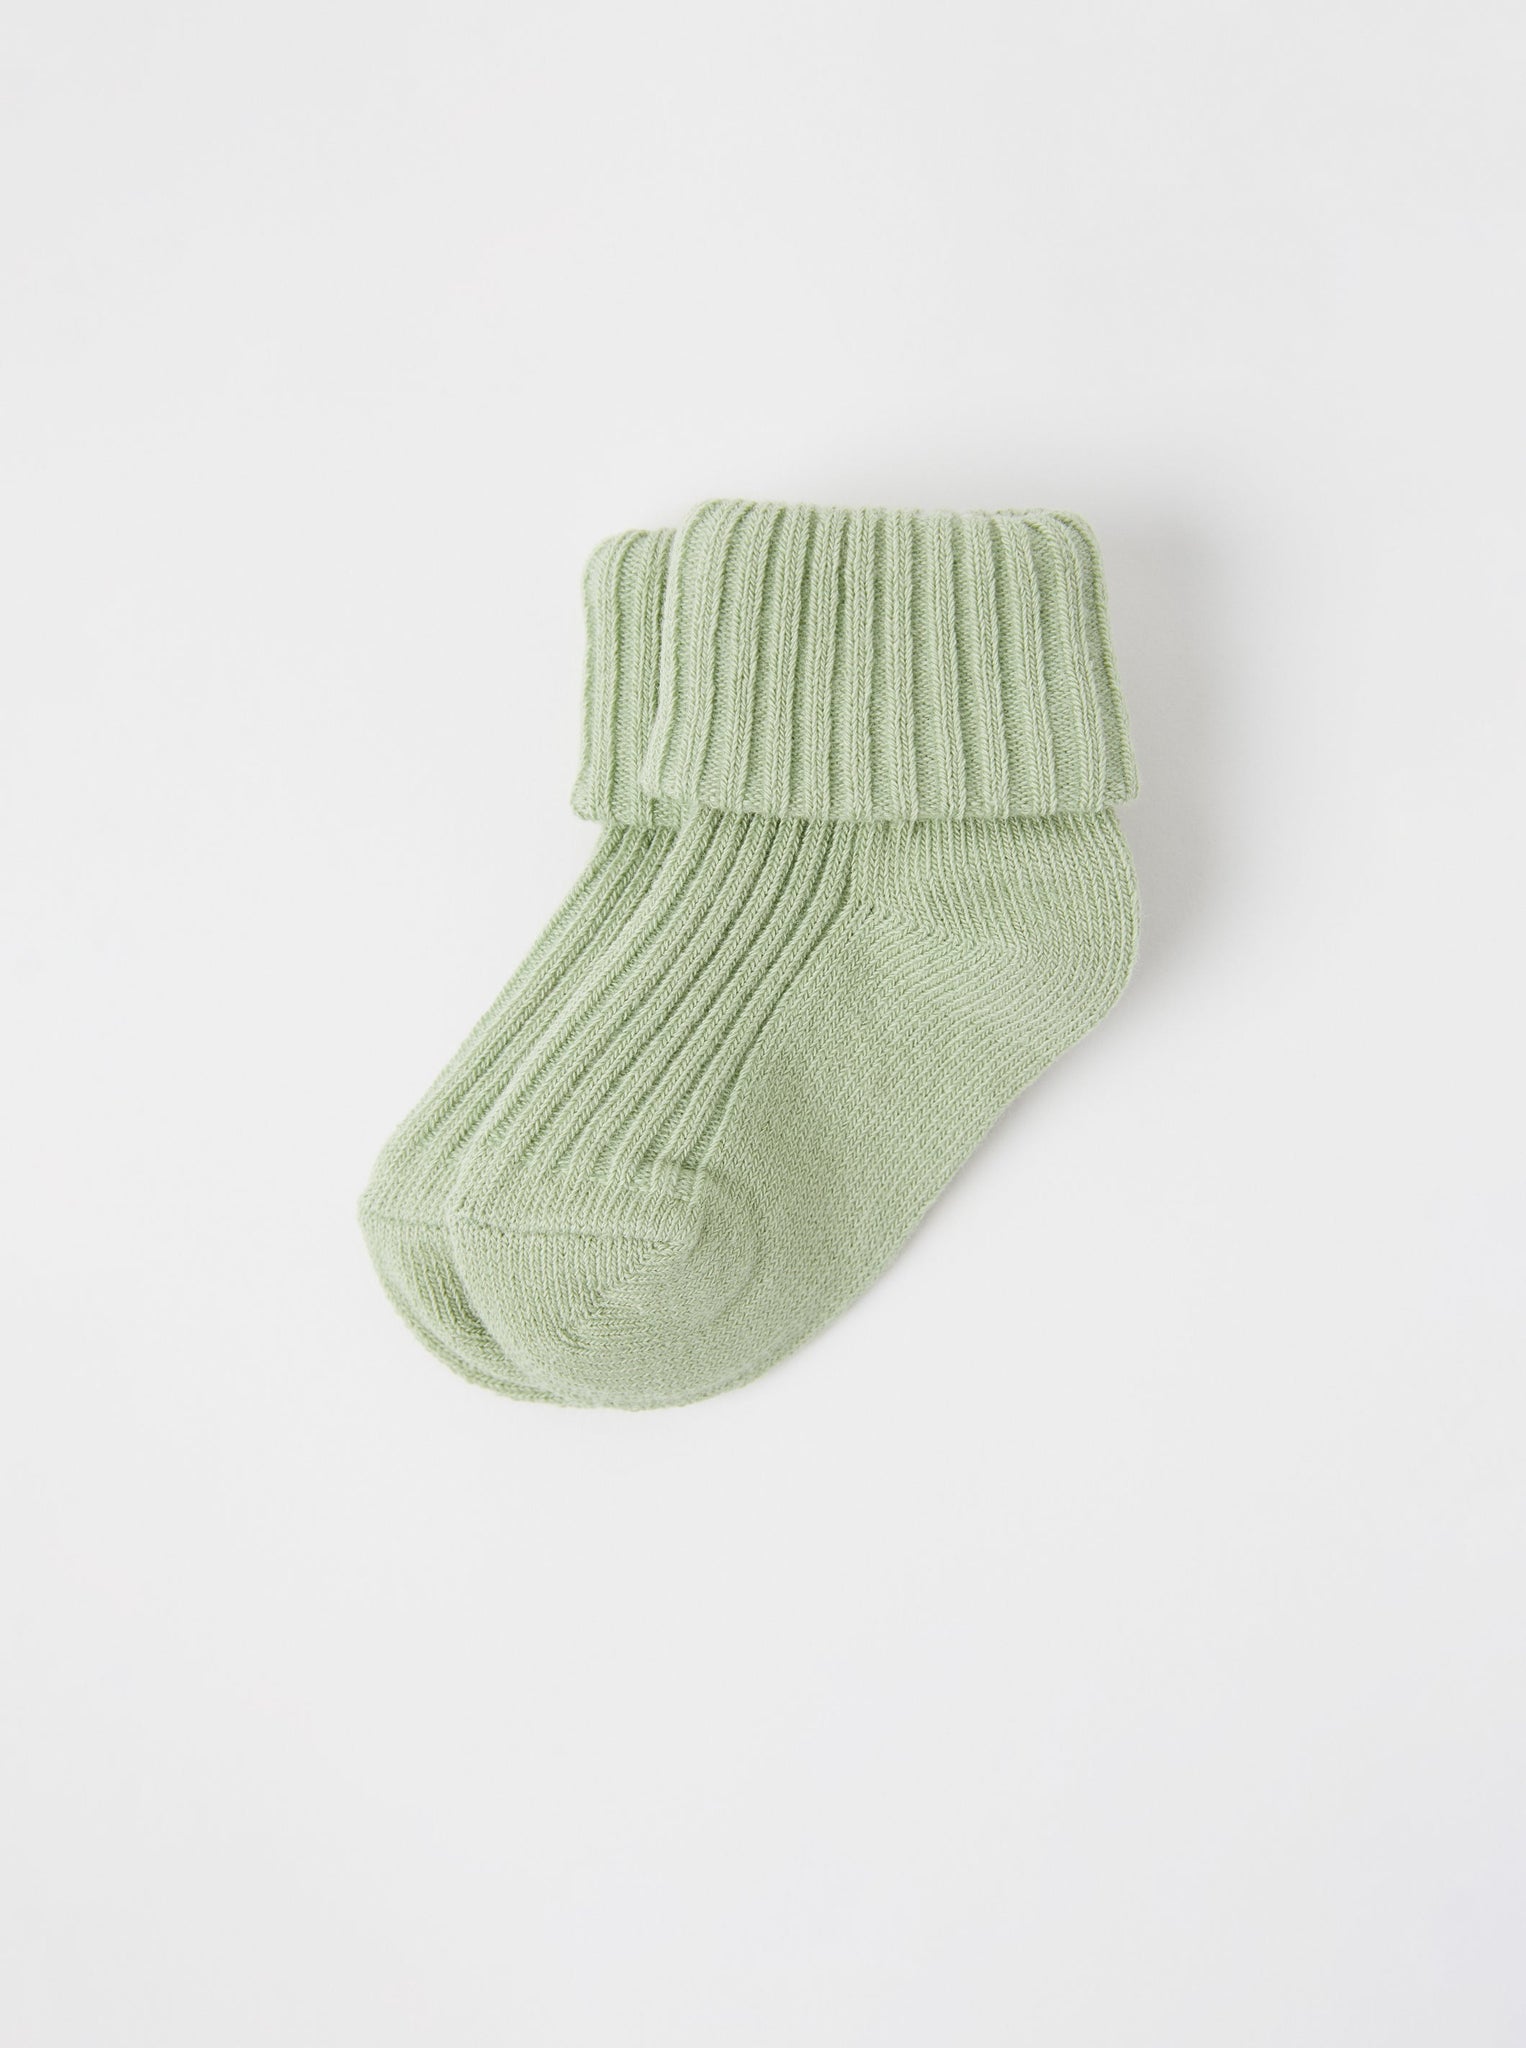 Organic Cotton Green Baby Socks from the Polarn O. Pyret babywear collection. Nordic kids clothes made from sustainable sources.